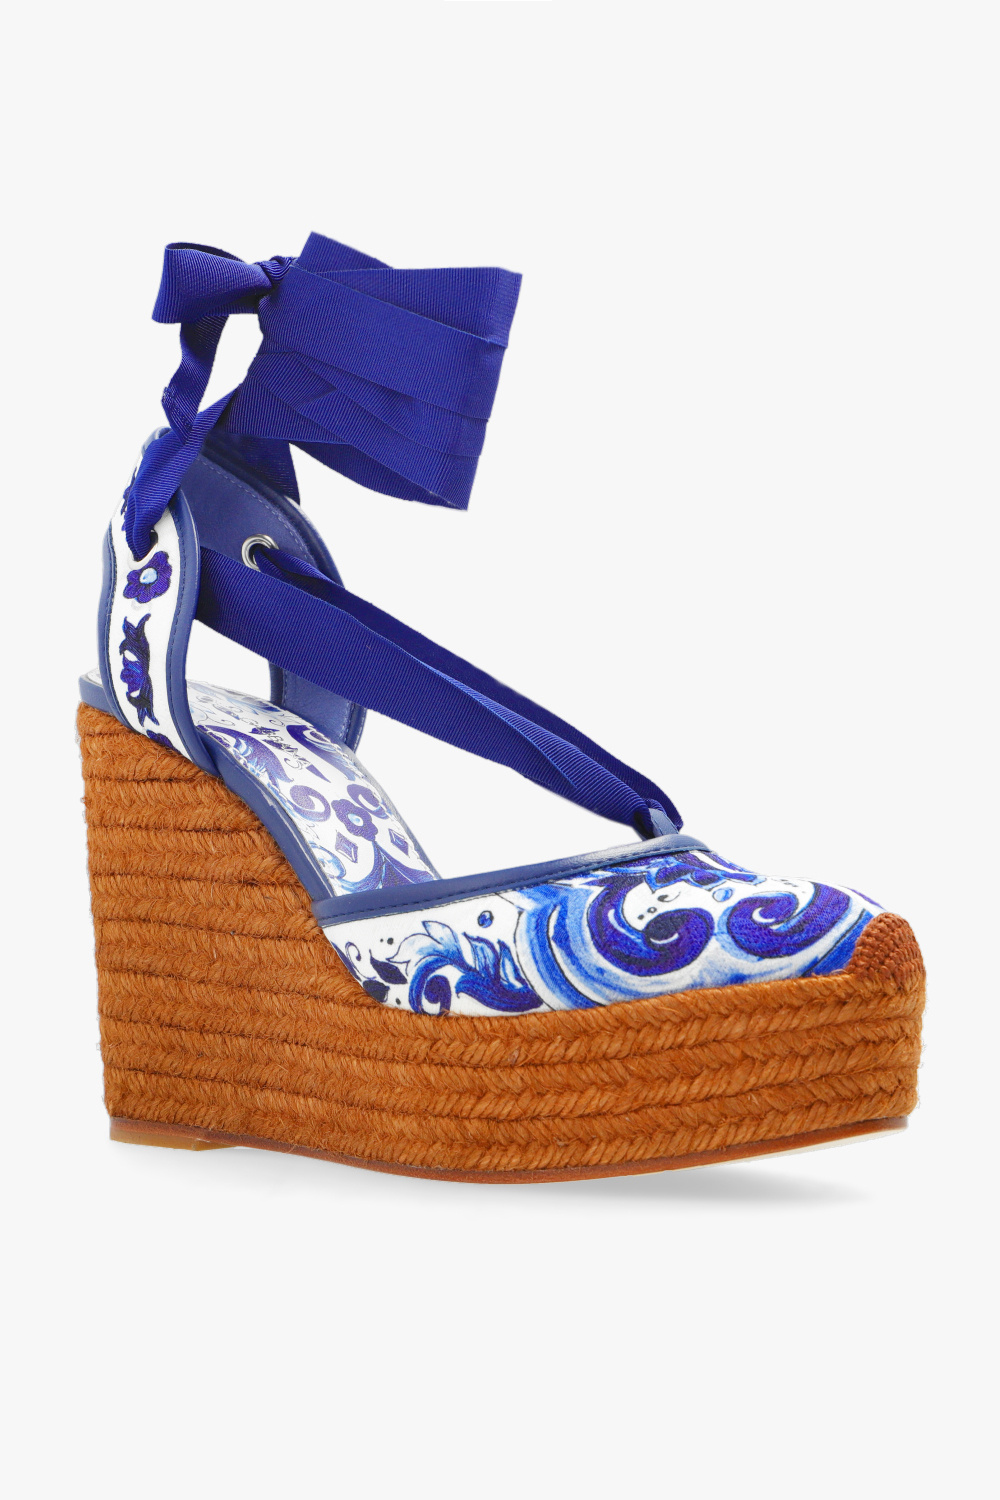 Dolce & Gabbana Patterned wedge shoes